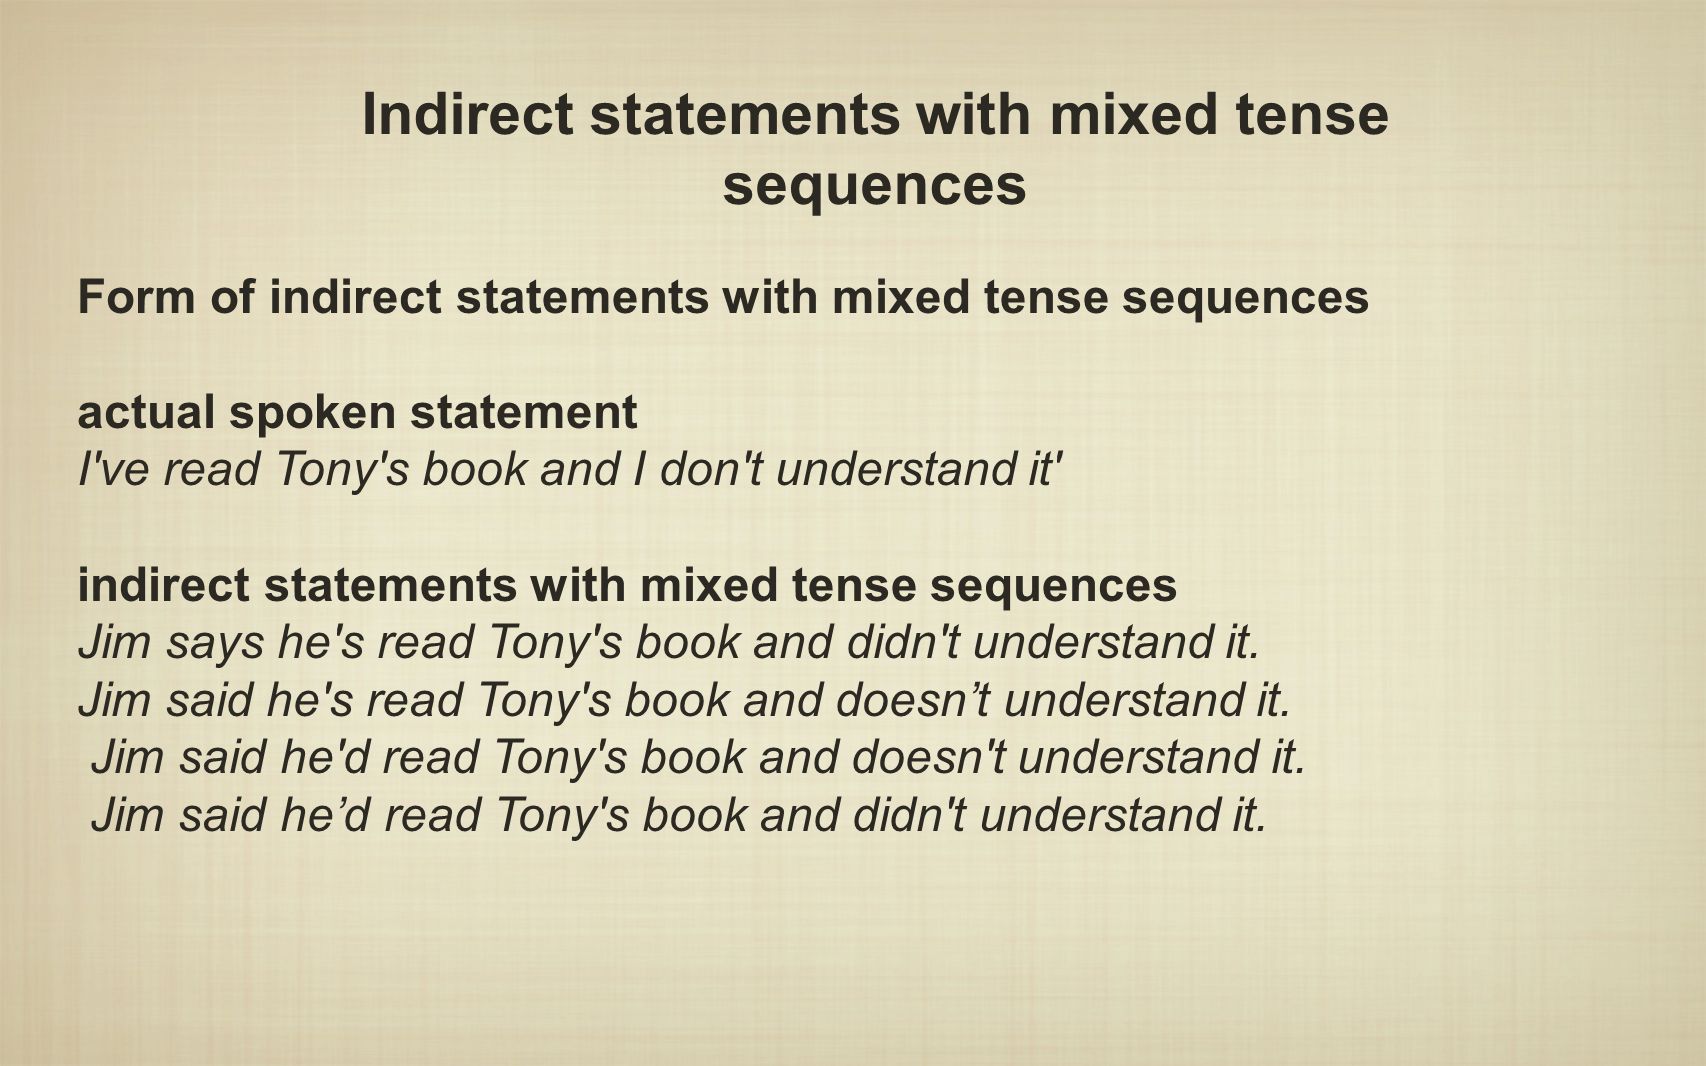 Indirect statements with mixed tense sequences